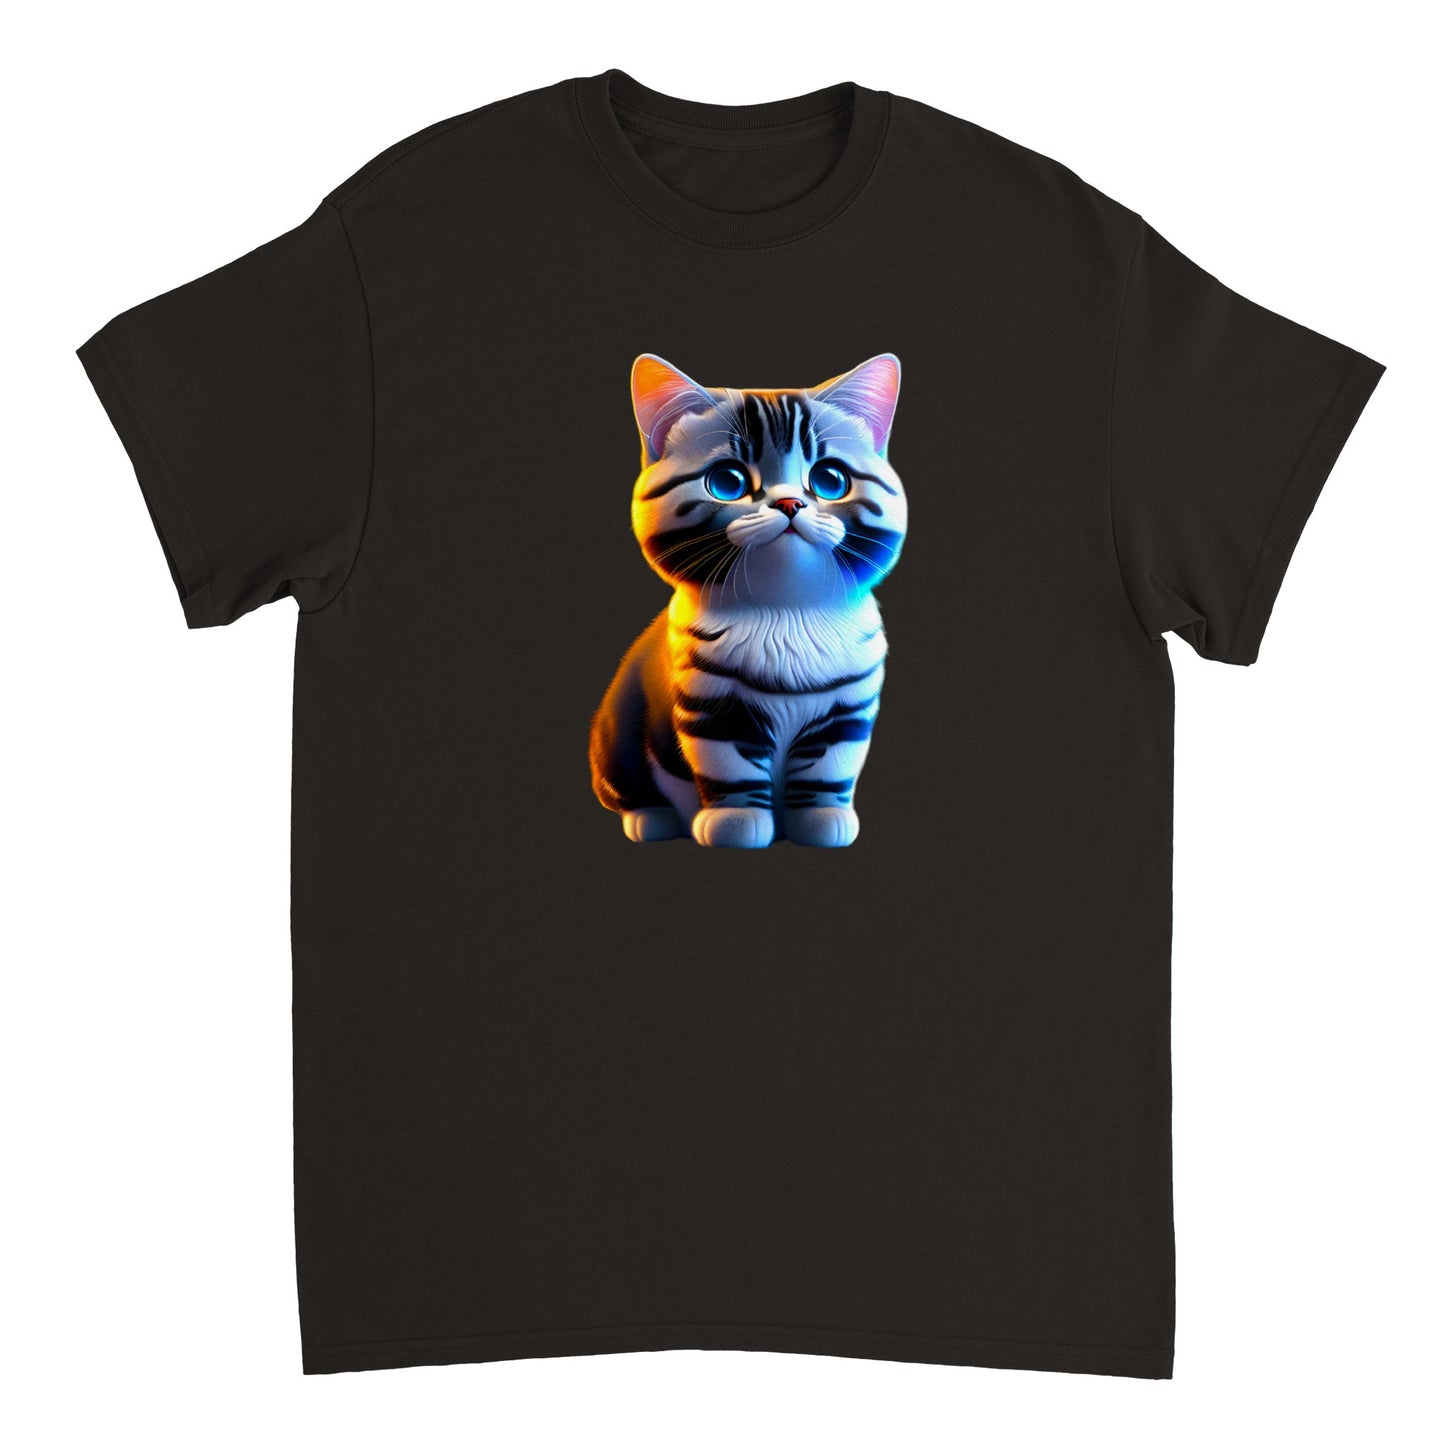 Adorable, Cool, Cute Cats and Kittens Toy - Heavyweight Unisex Crewneck T-shirt 28